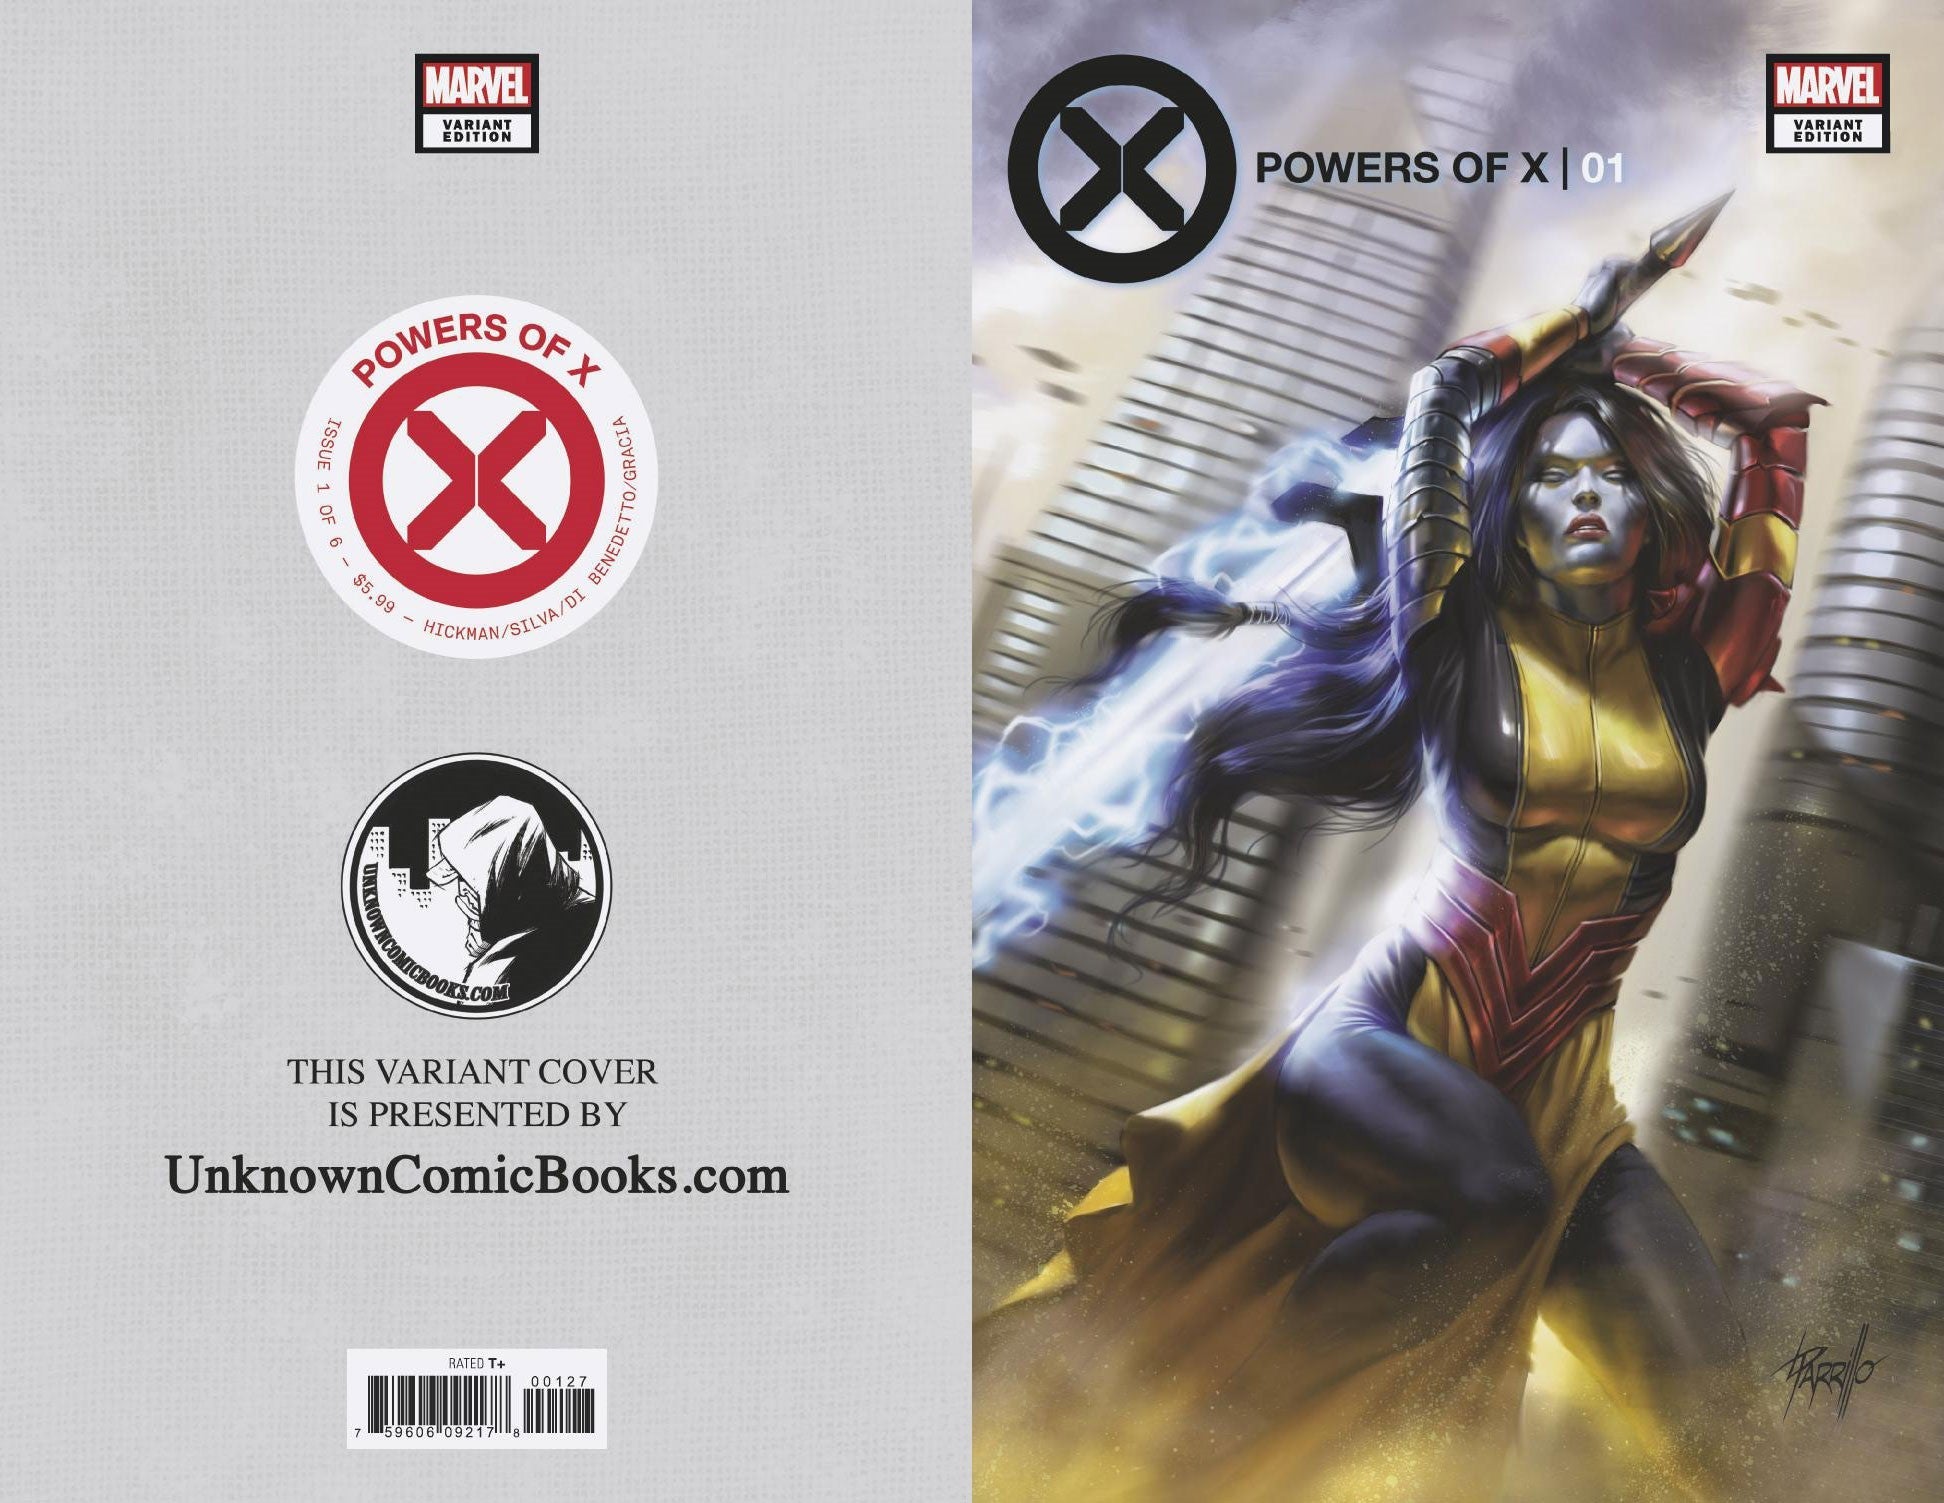 POWERS OF X #1 (OF 6) UNKNOWN COMICS LUCIO PARRILLO EXCLUSIVE (07/31/2019) - FURYCOMIX